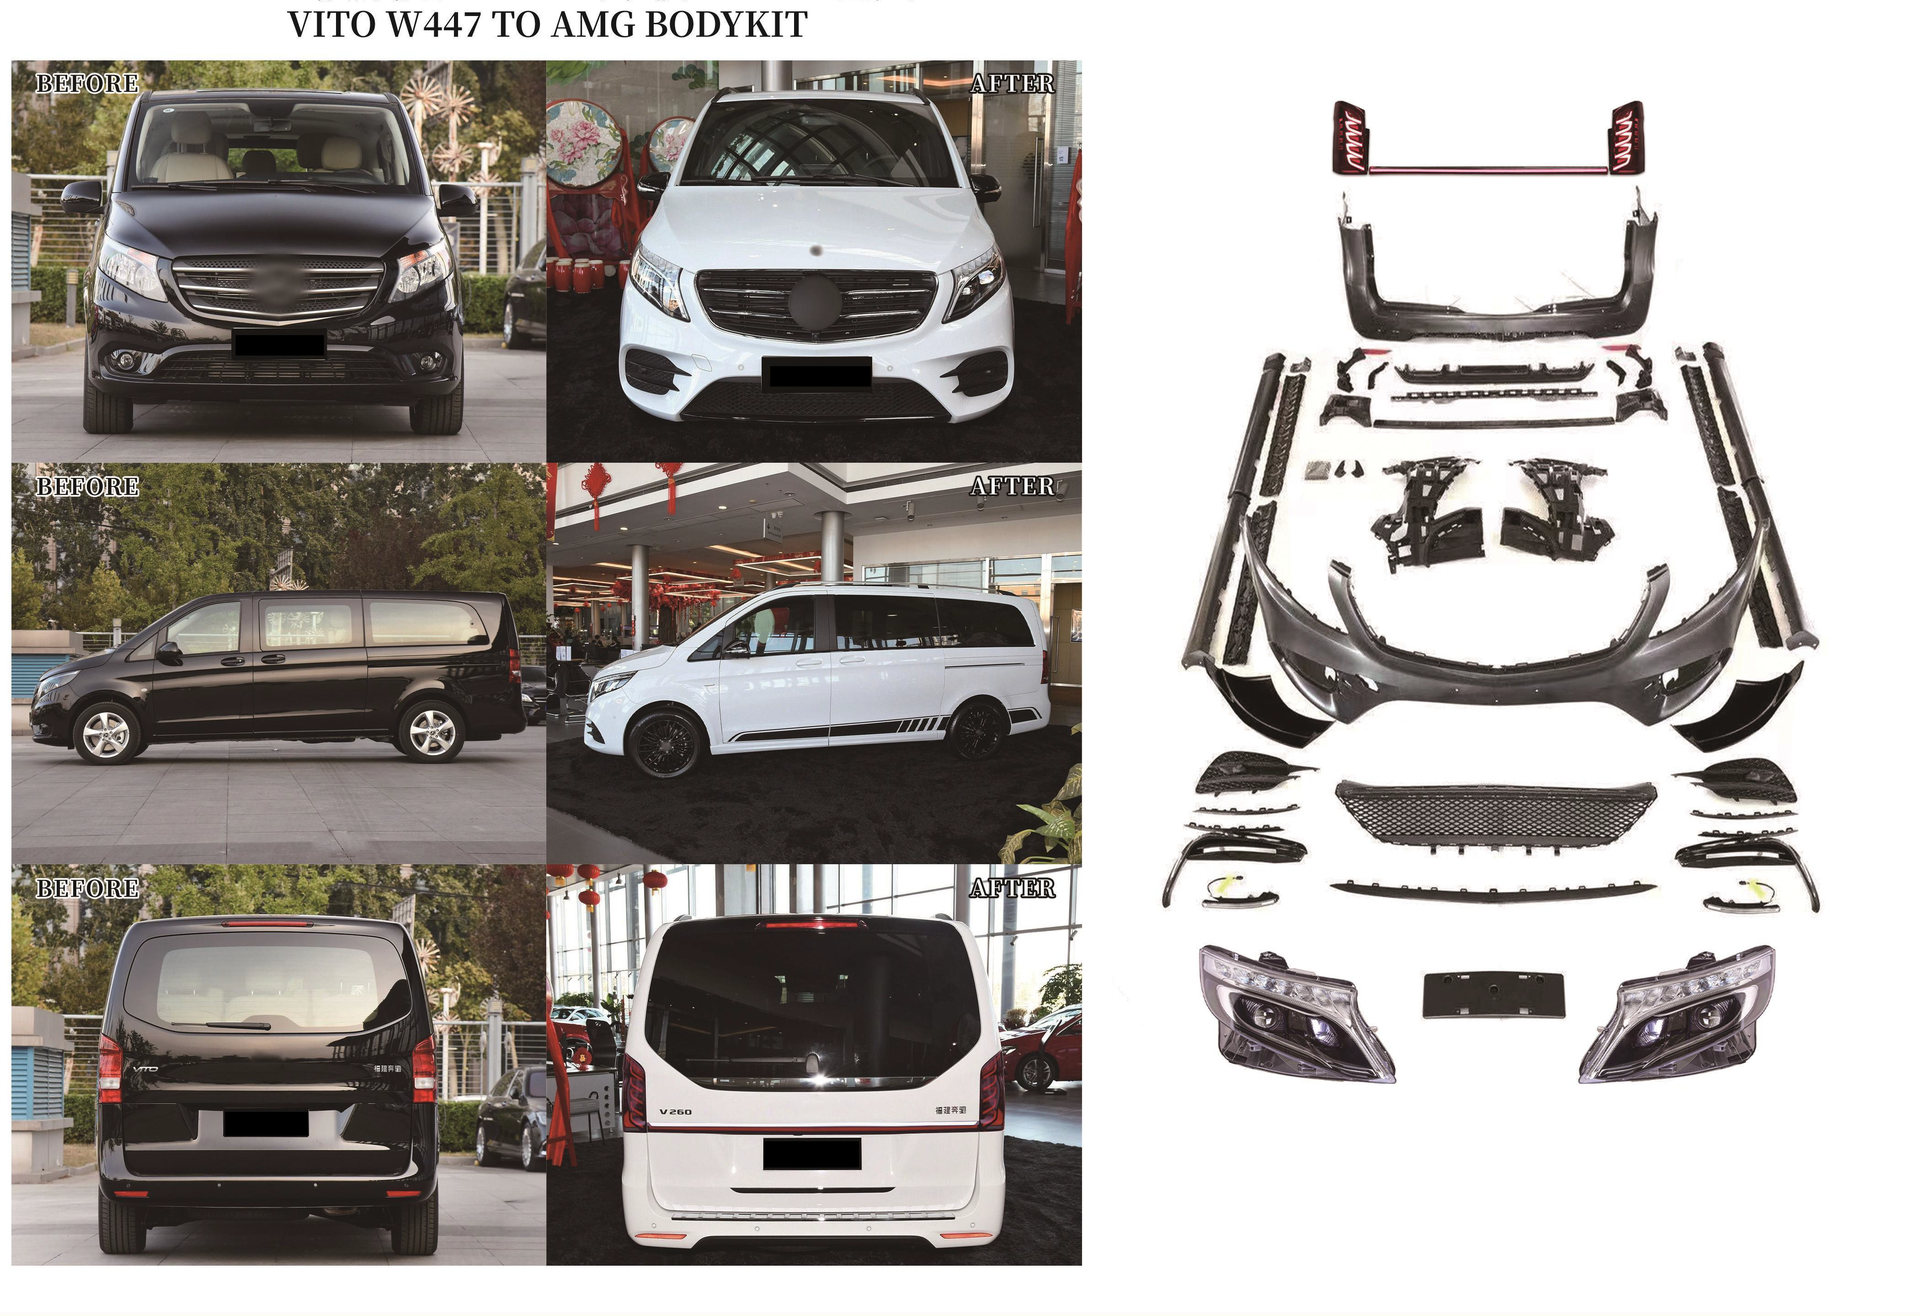 CONVERSION BODY KIT FOR MERCEDES BENZ VITO W639 TO V-CLASS W447